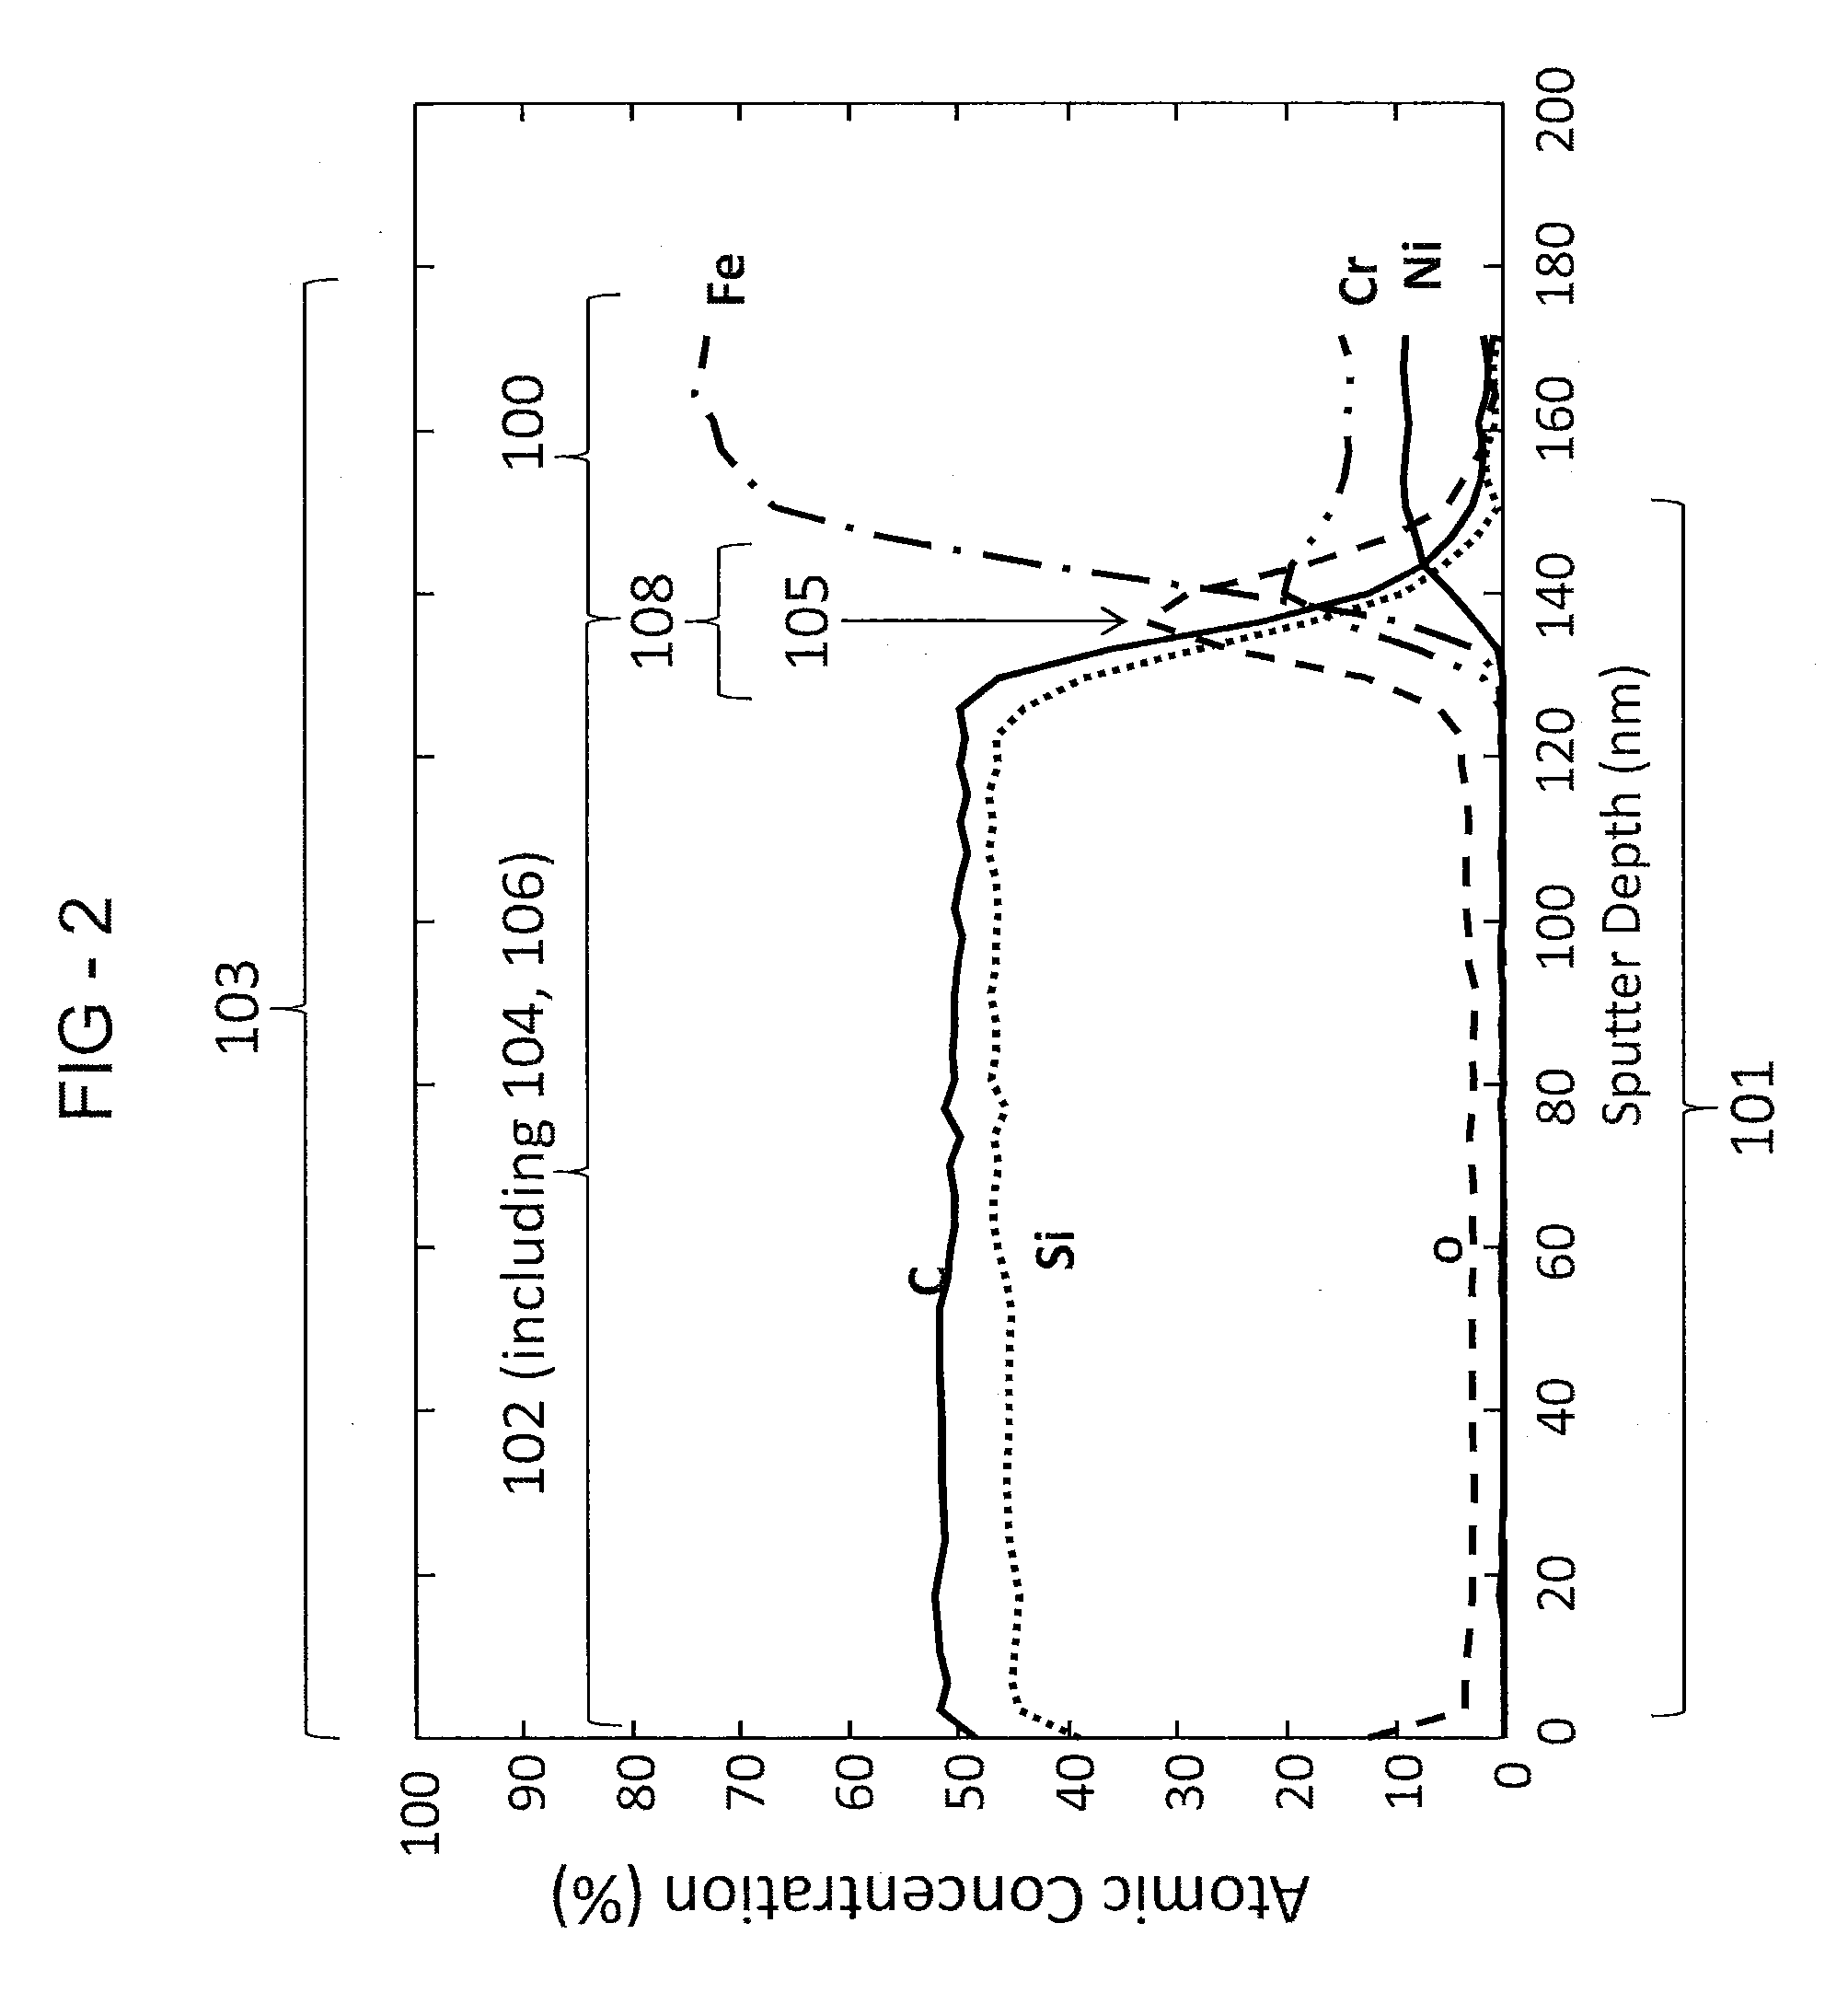 Chemical vapor deposition coating, article, and method